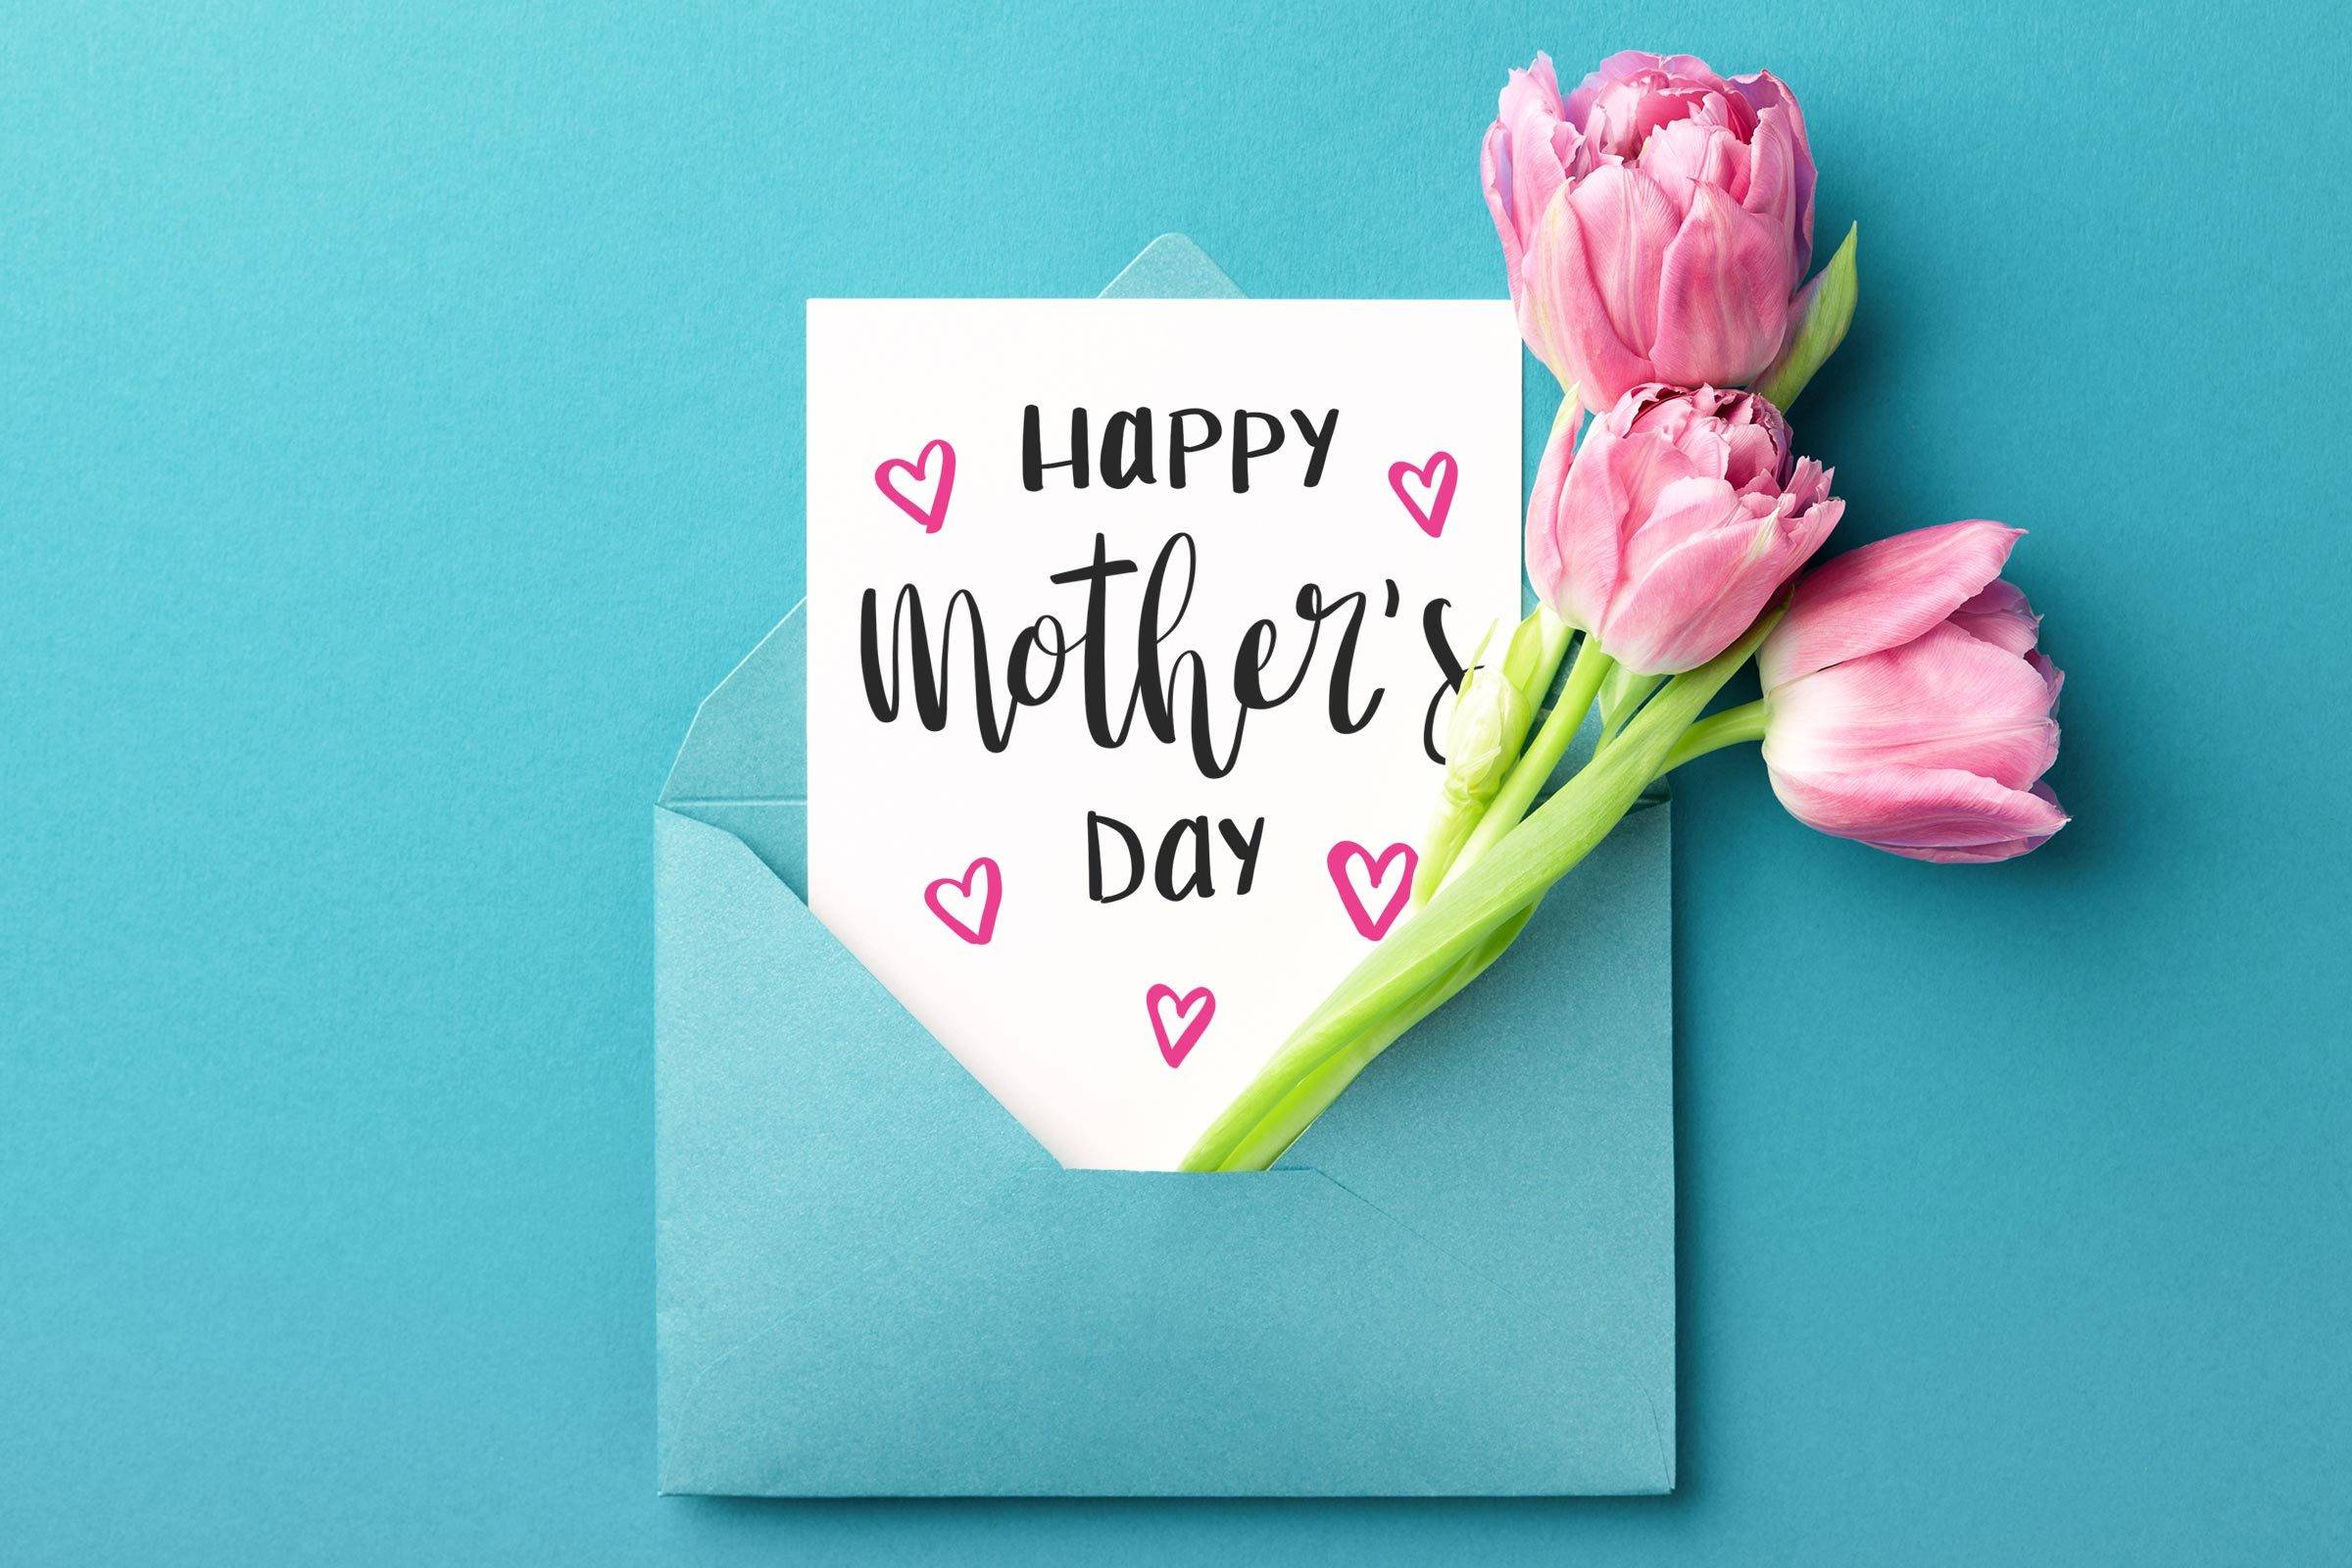 Mother's Day 2022: 10 Fun and Creative Ways to Celebrate Mom This Year